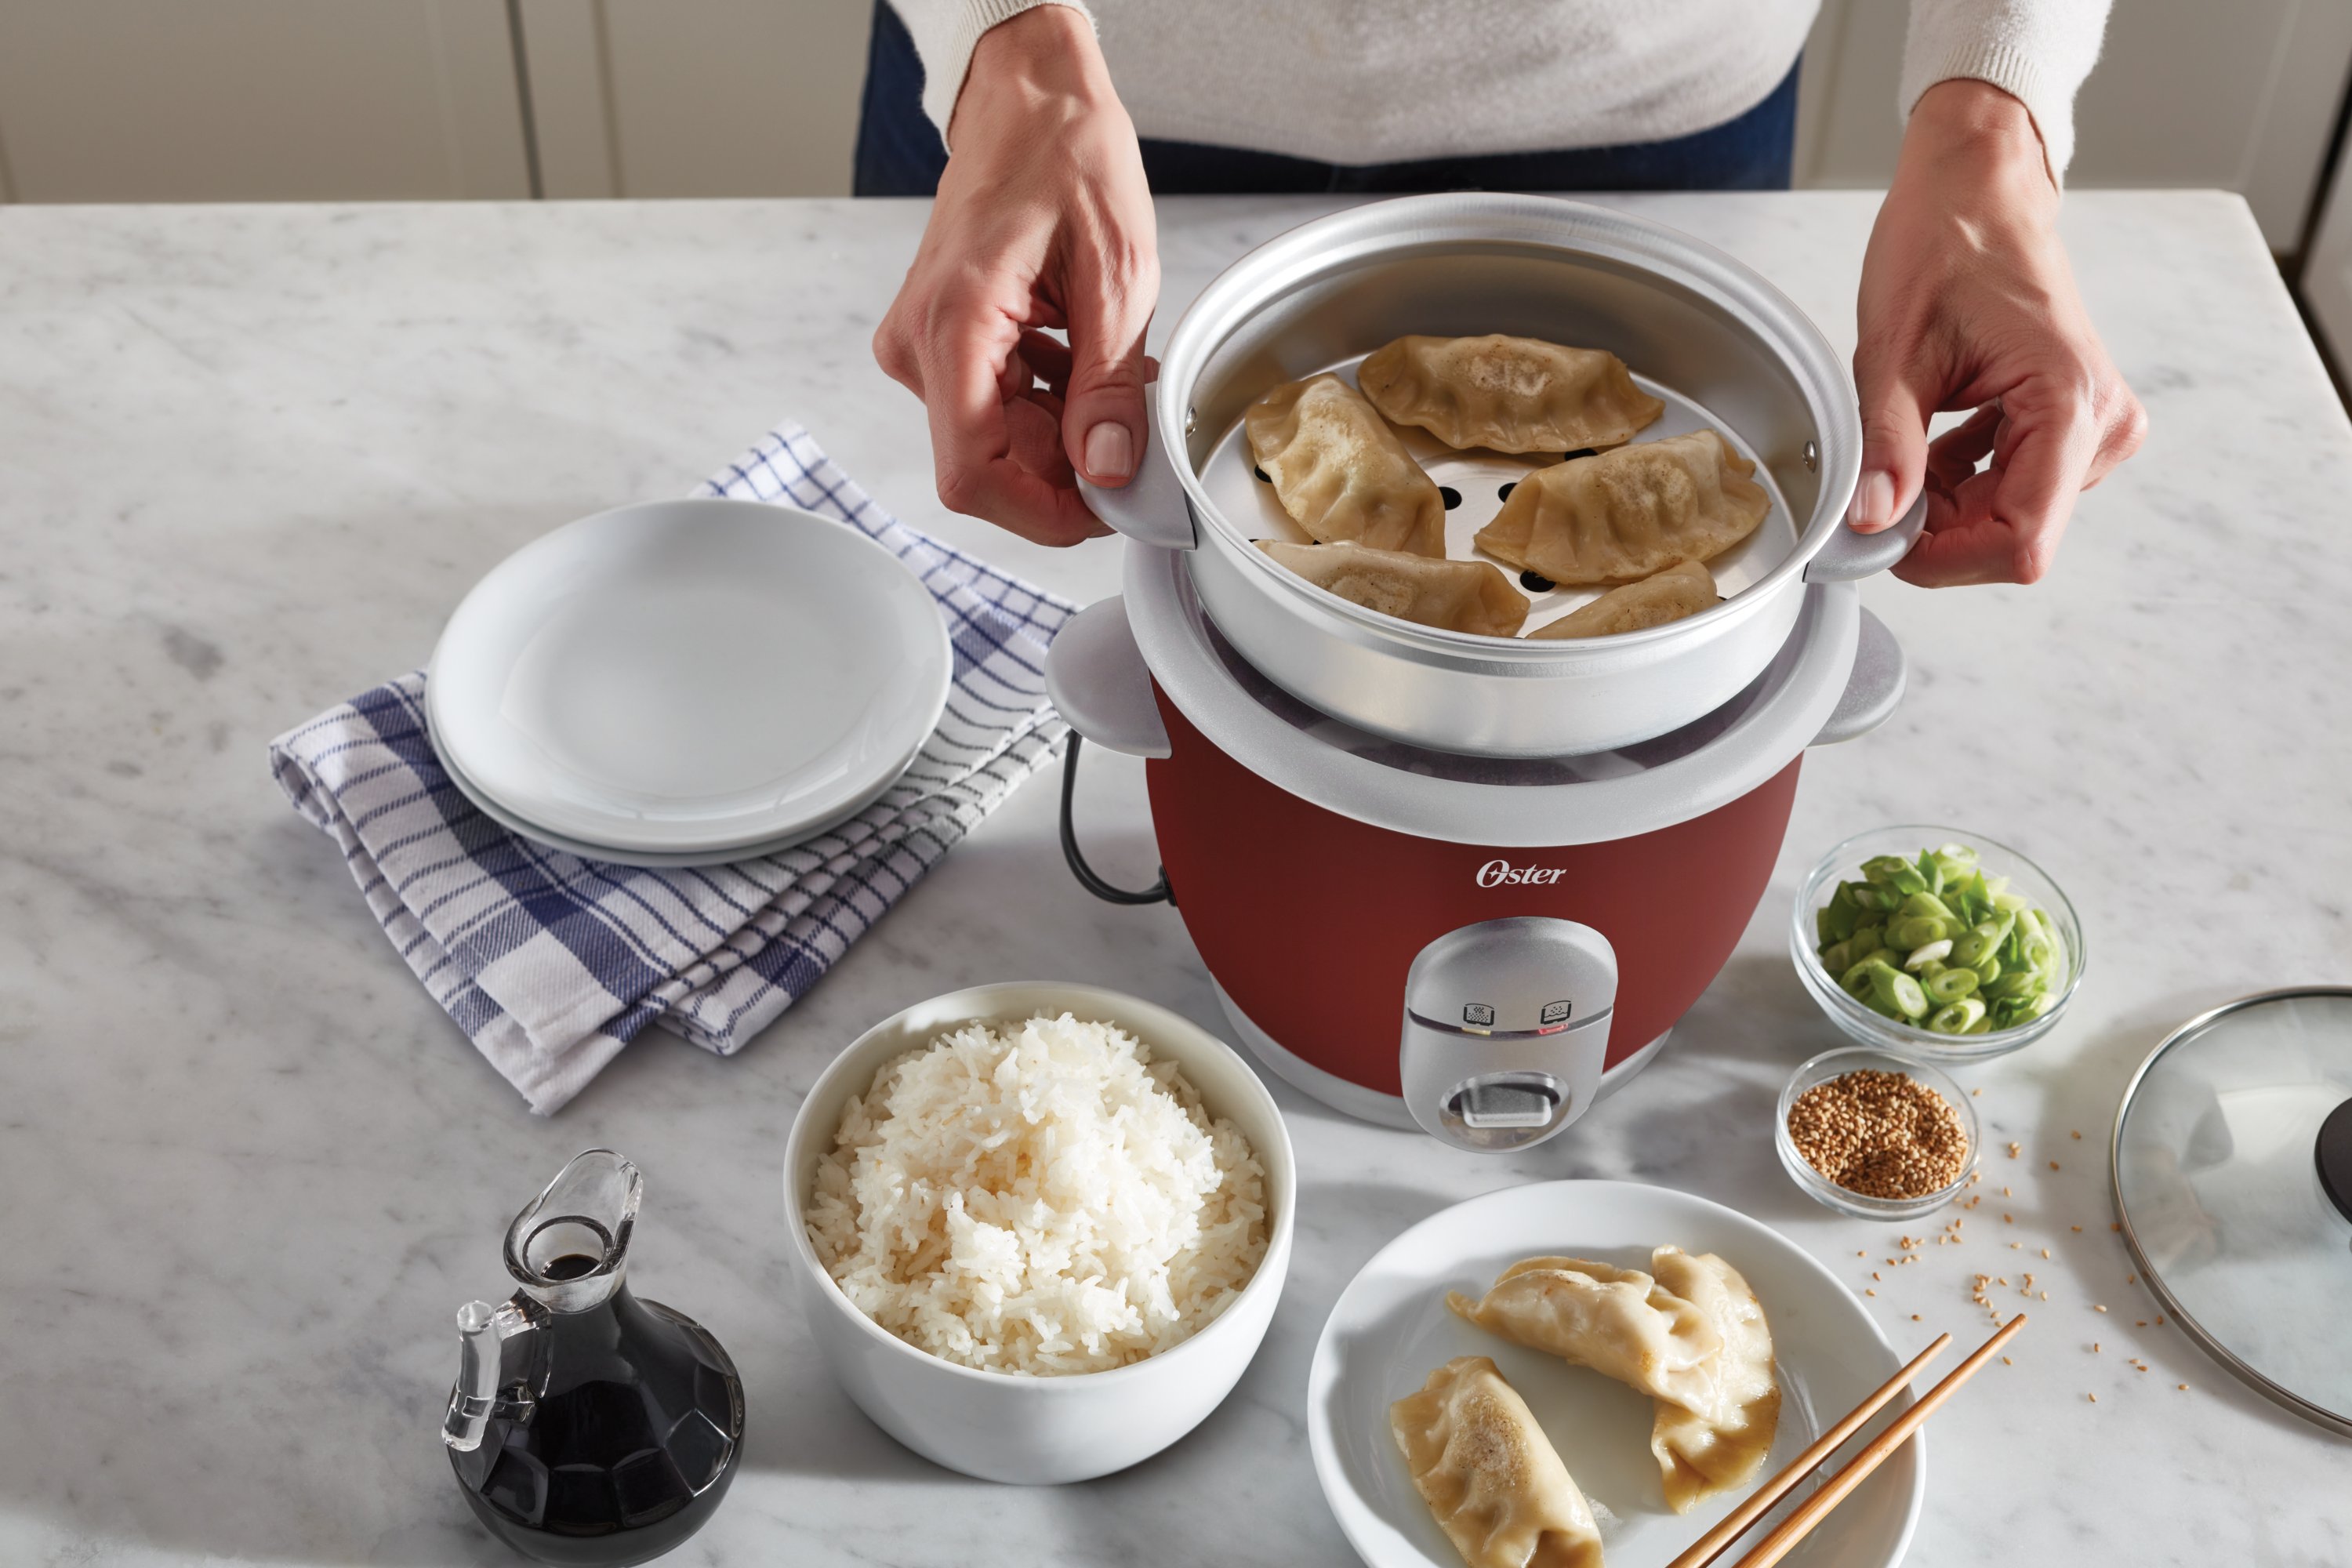 https://s7d9.scene7.com/is/image/NewellRubbermaid/4722000000-oster-rice-cooker-with-steamer-red-top-down-with-food-lifestyle-with-talent-1